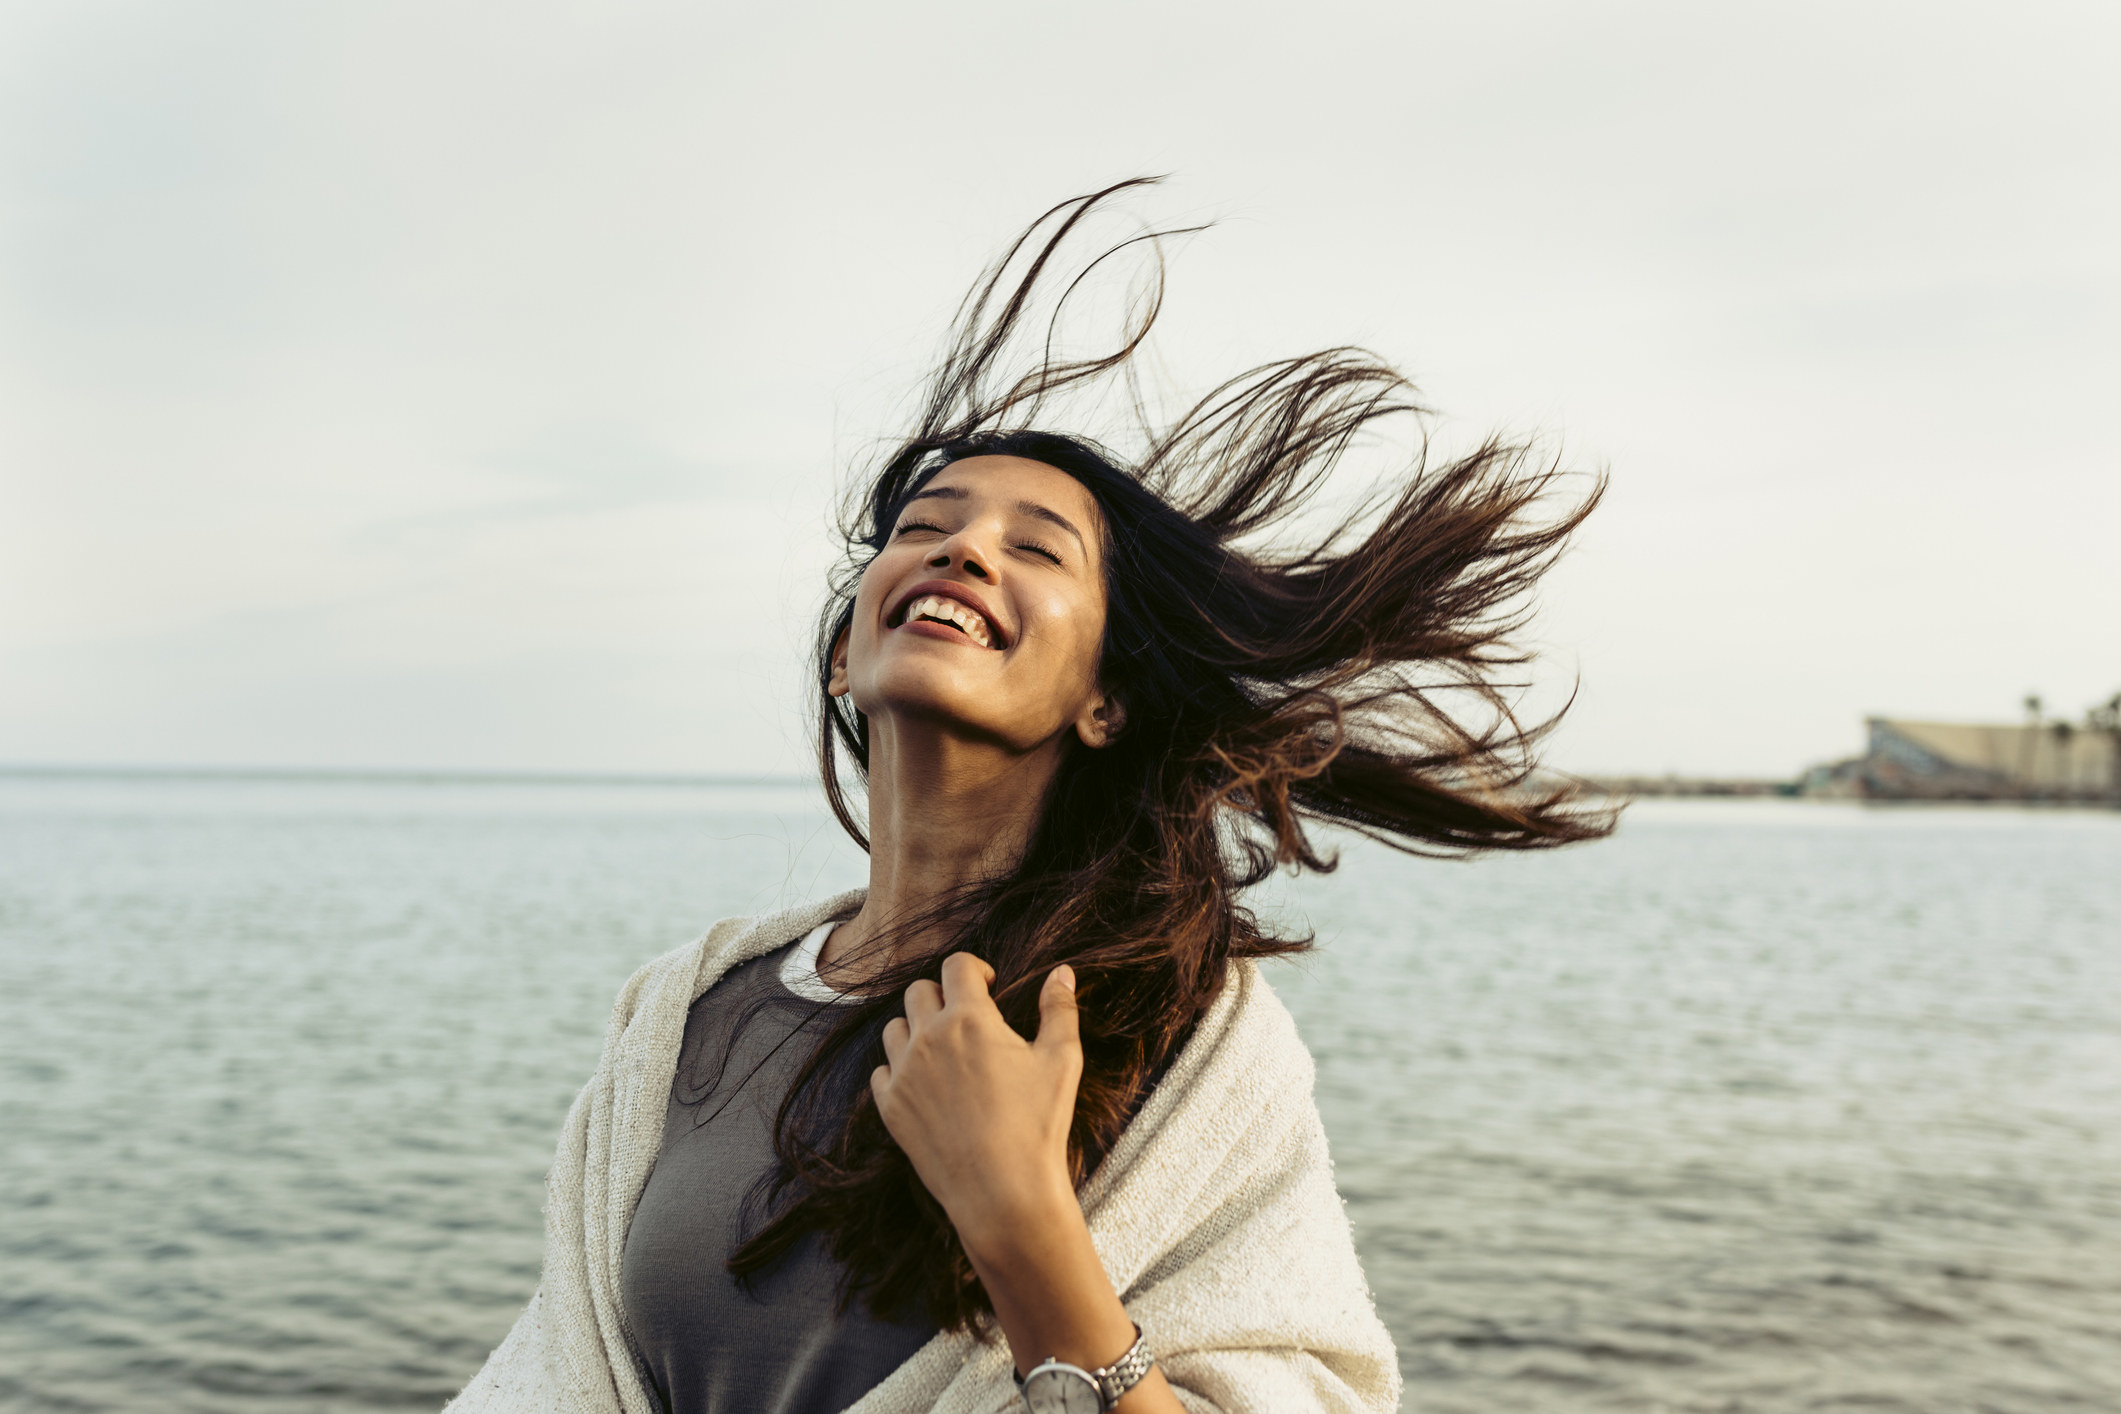 Person stands by a body of water as wind blows through their hair